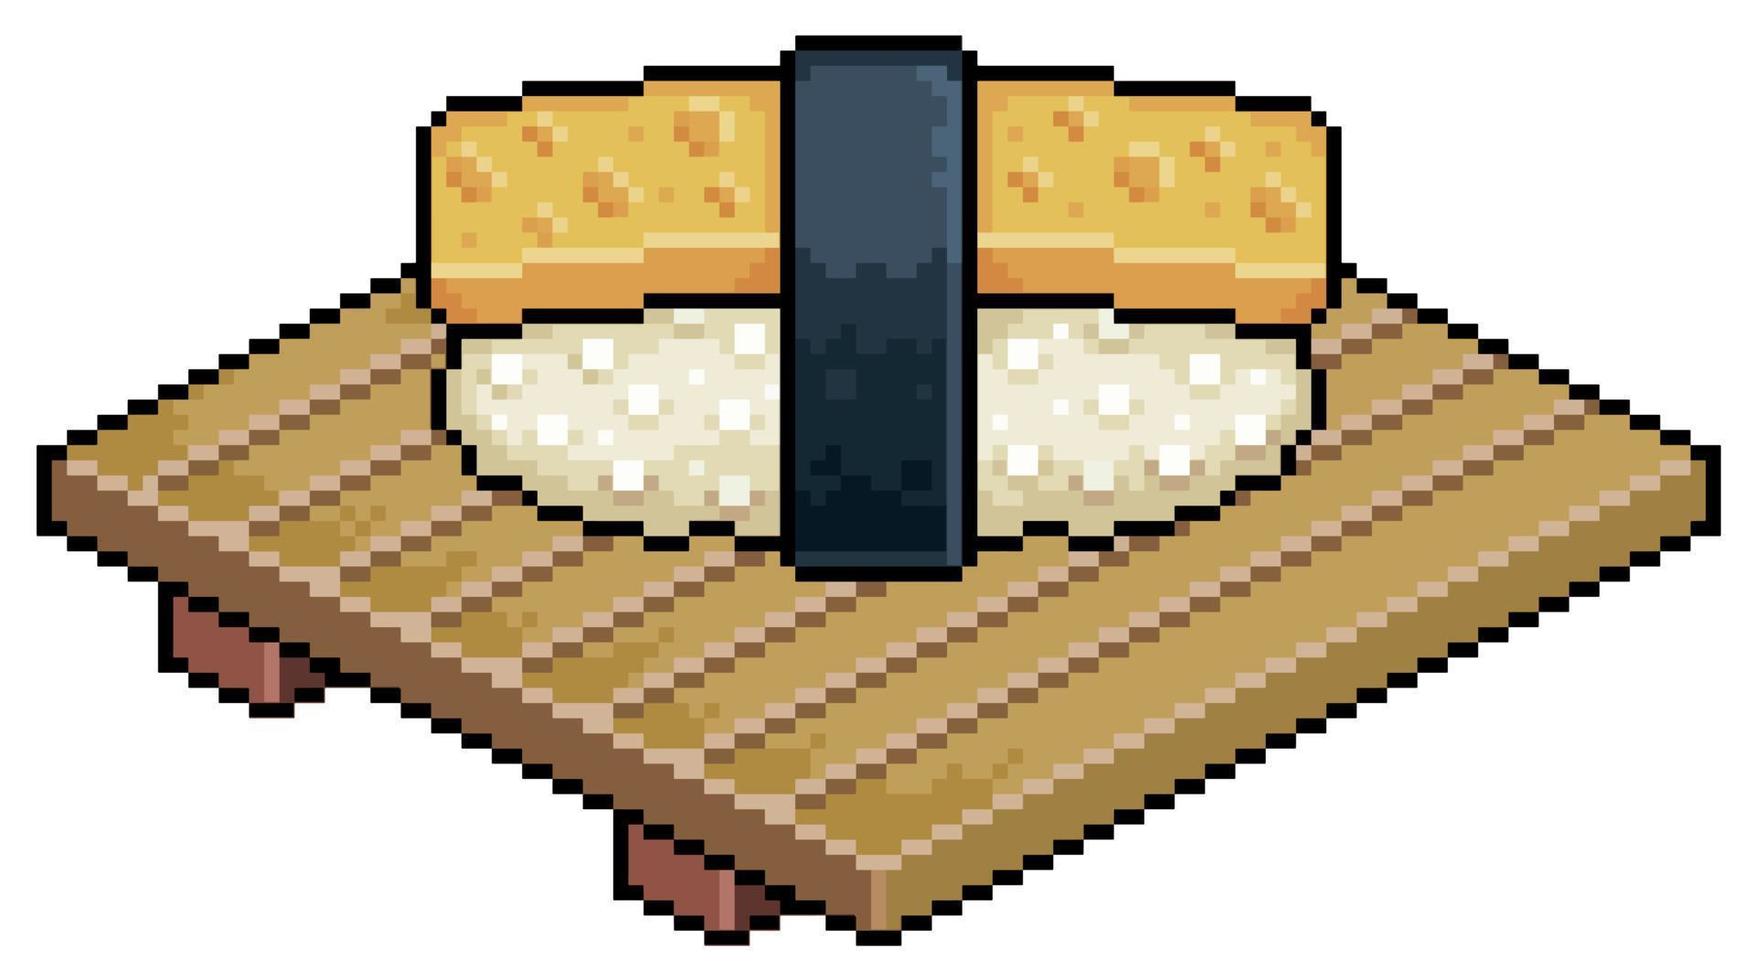 Pixel art tamago nigiri on wooden board for sushi vector icon for 8bit game on white background